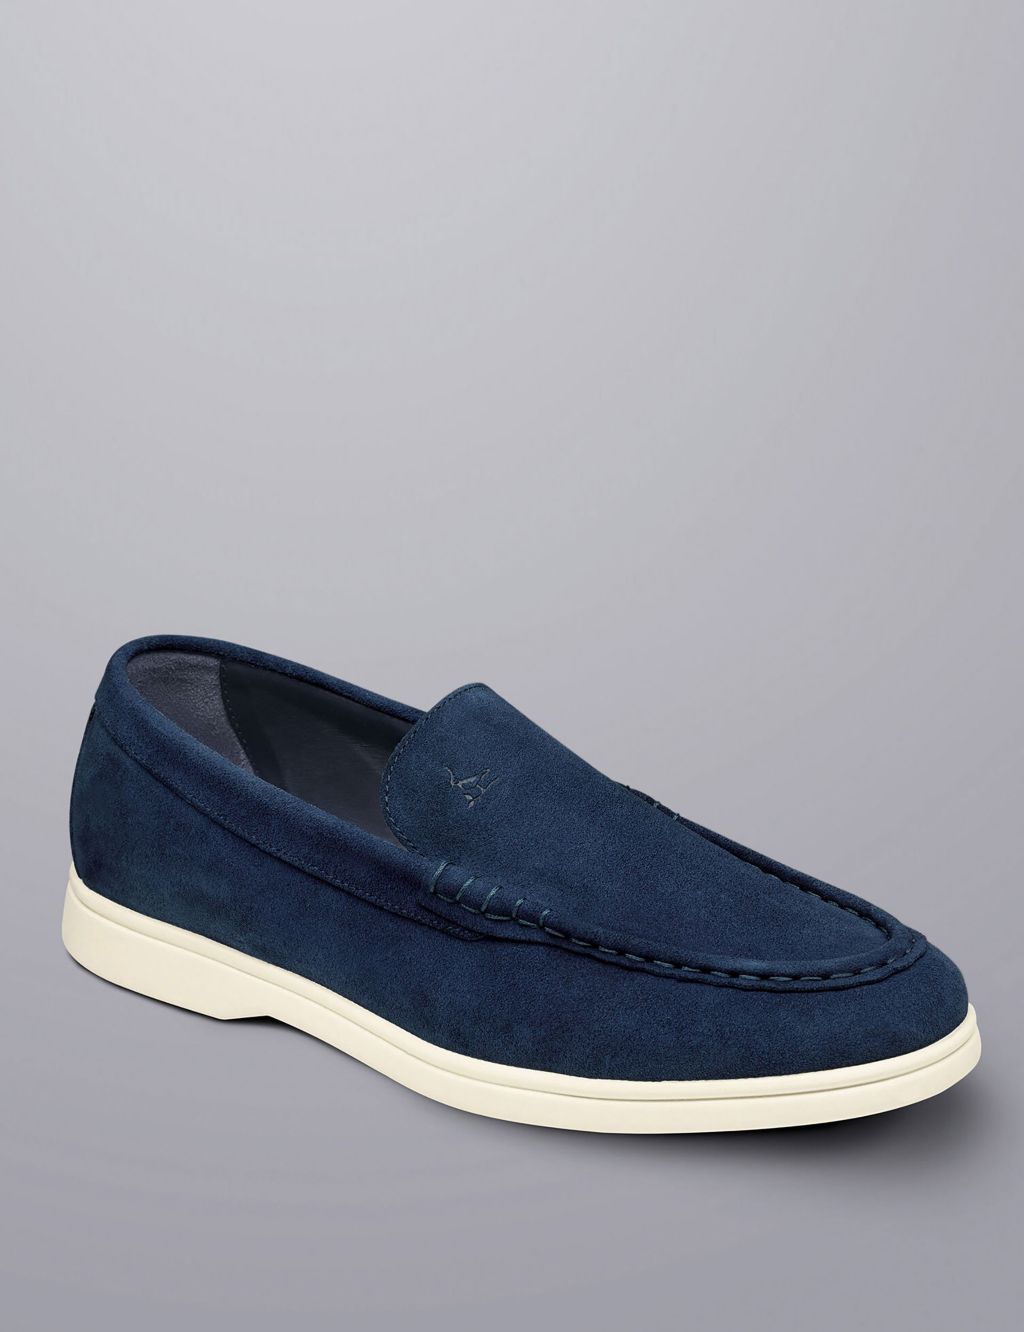 Suede Slip On Shoes image 3